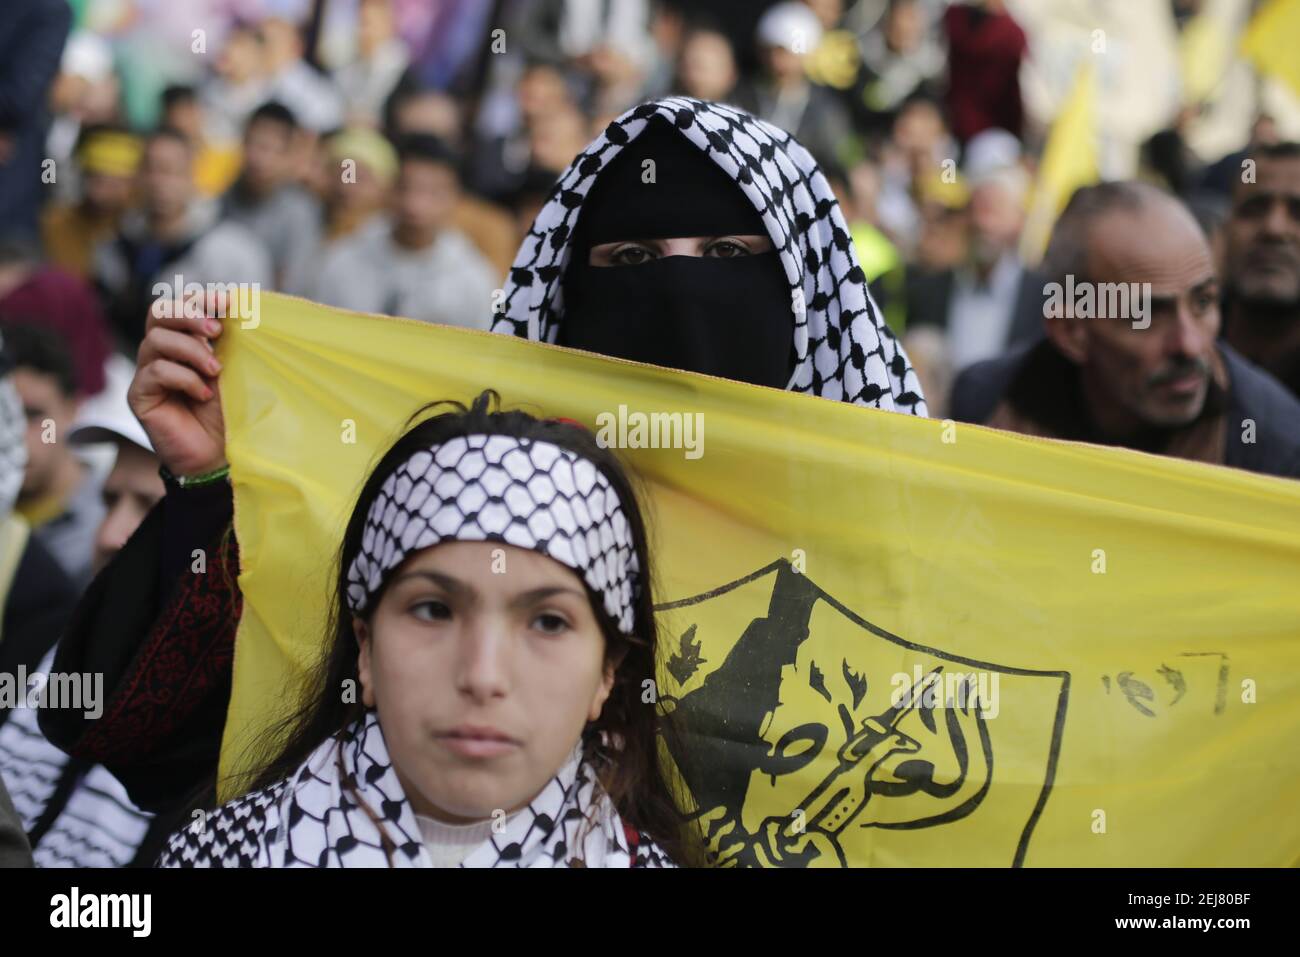 Palestinian women with a Yasser Arafat signature scarf during a rally  marking the 55th anniversary of the Fatah movement founding. Fatah is a  secular Palestinian party and former guerrilla movement founded by